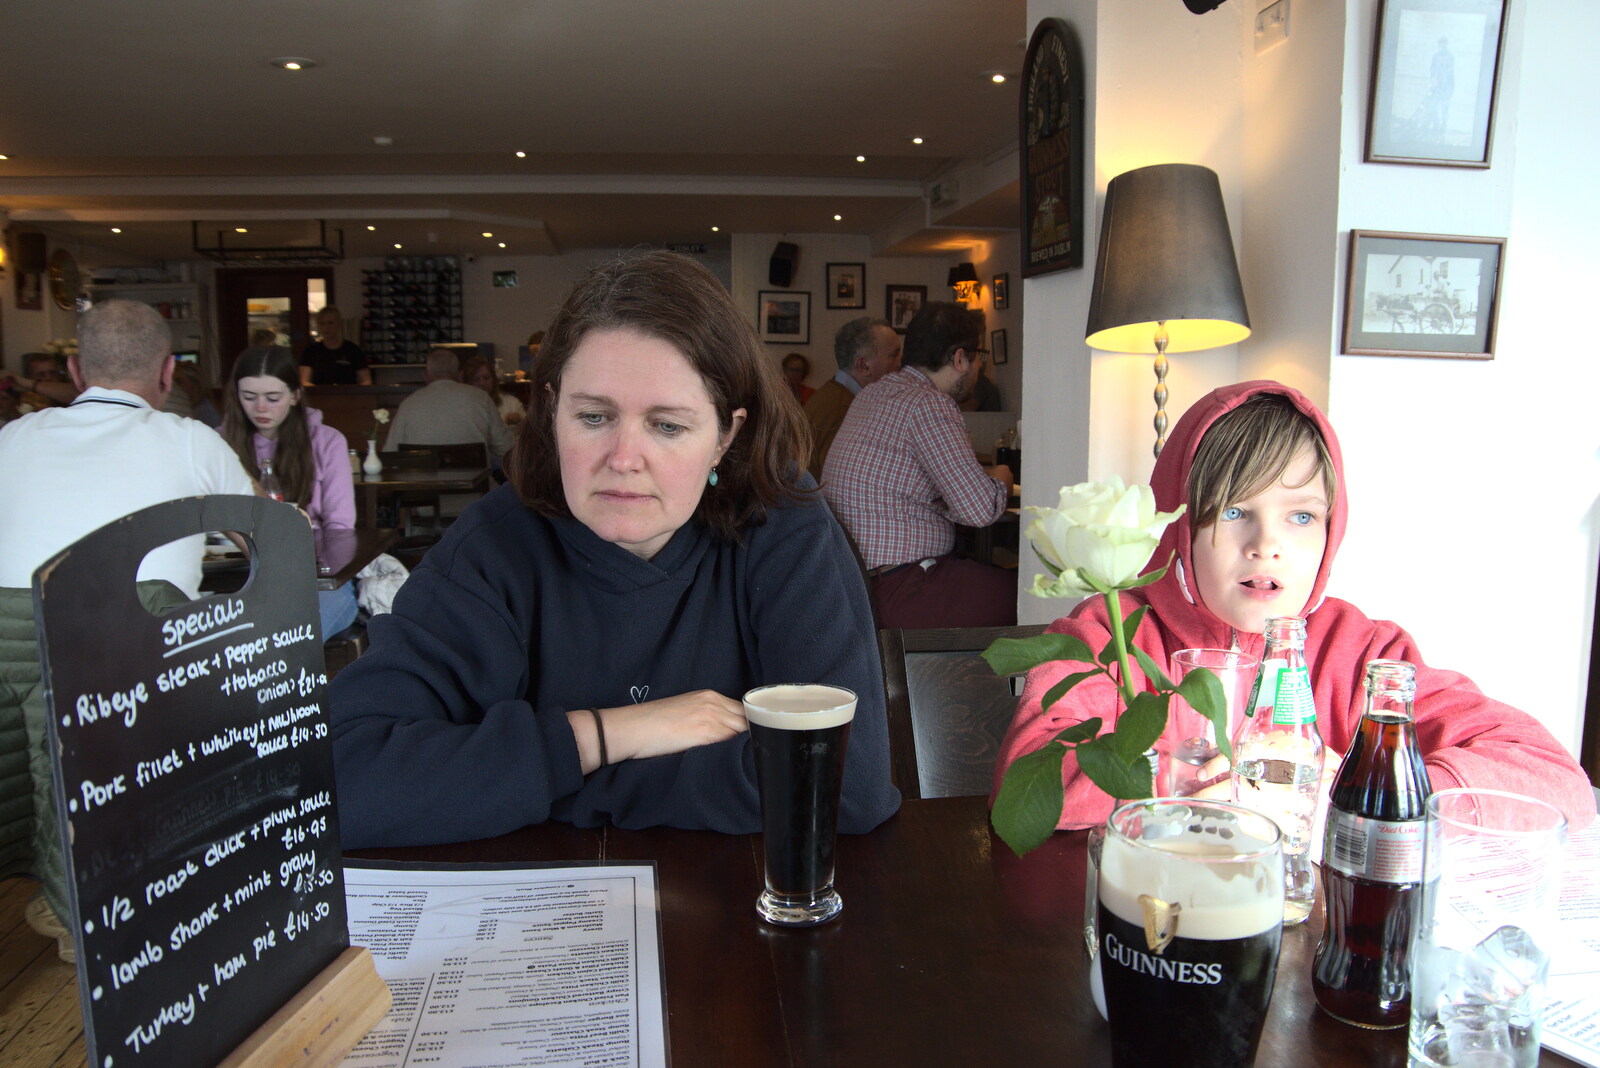 Greencastle, Doagh and Malin Head, County Donegal, Ireland - 19th April 2022: Isobel scopes the menu in the Point Bar